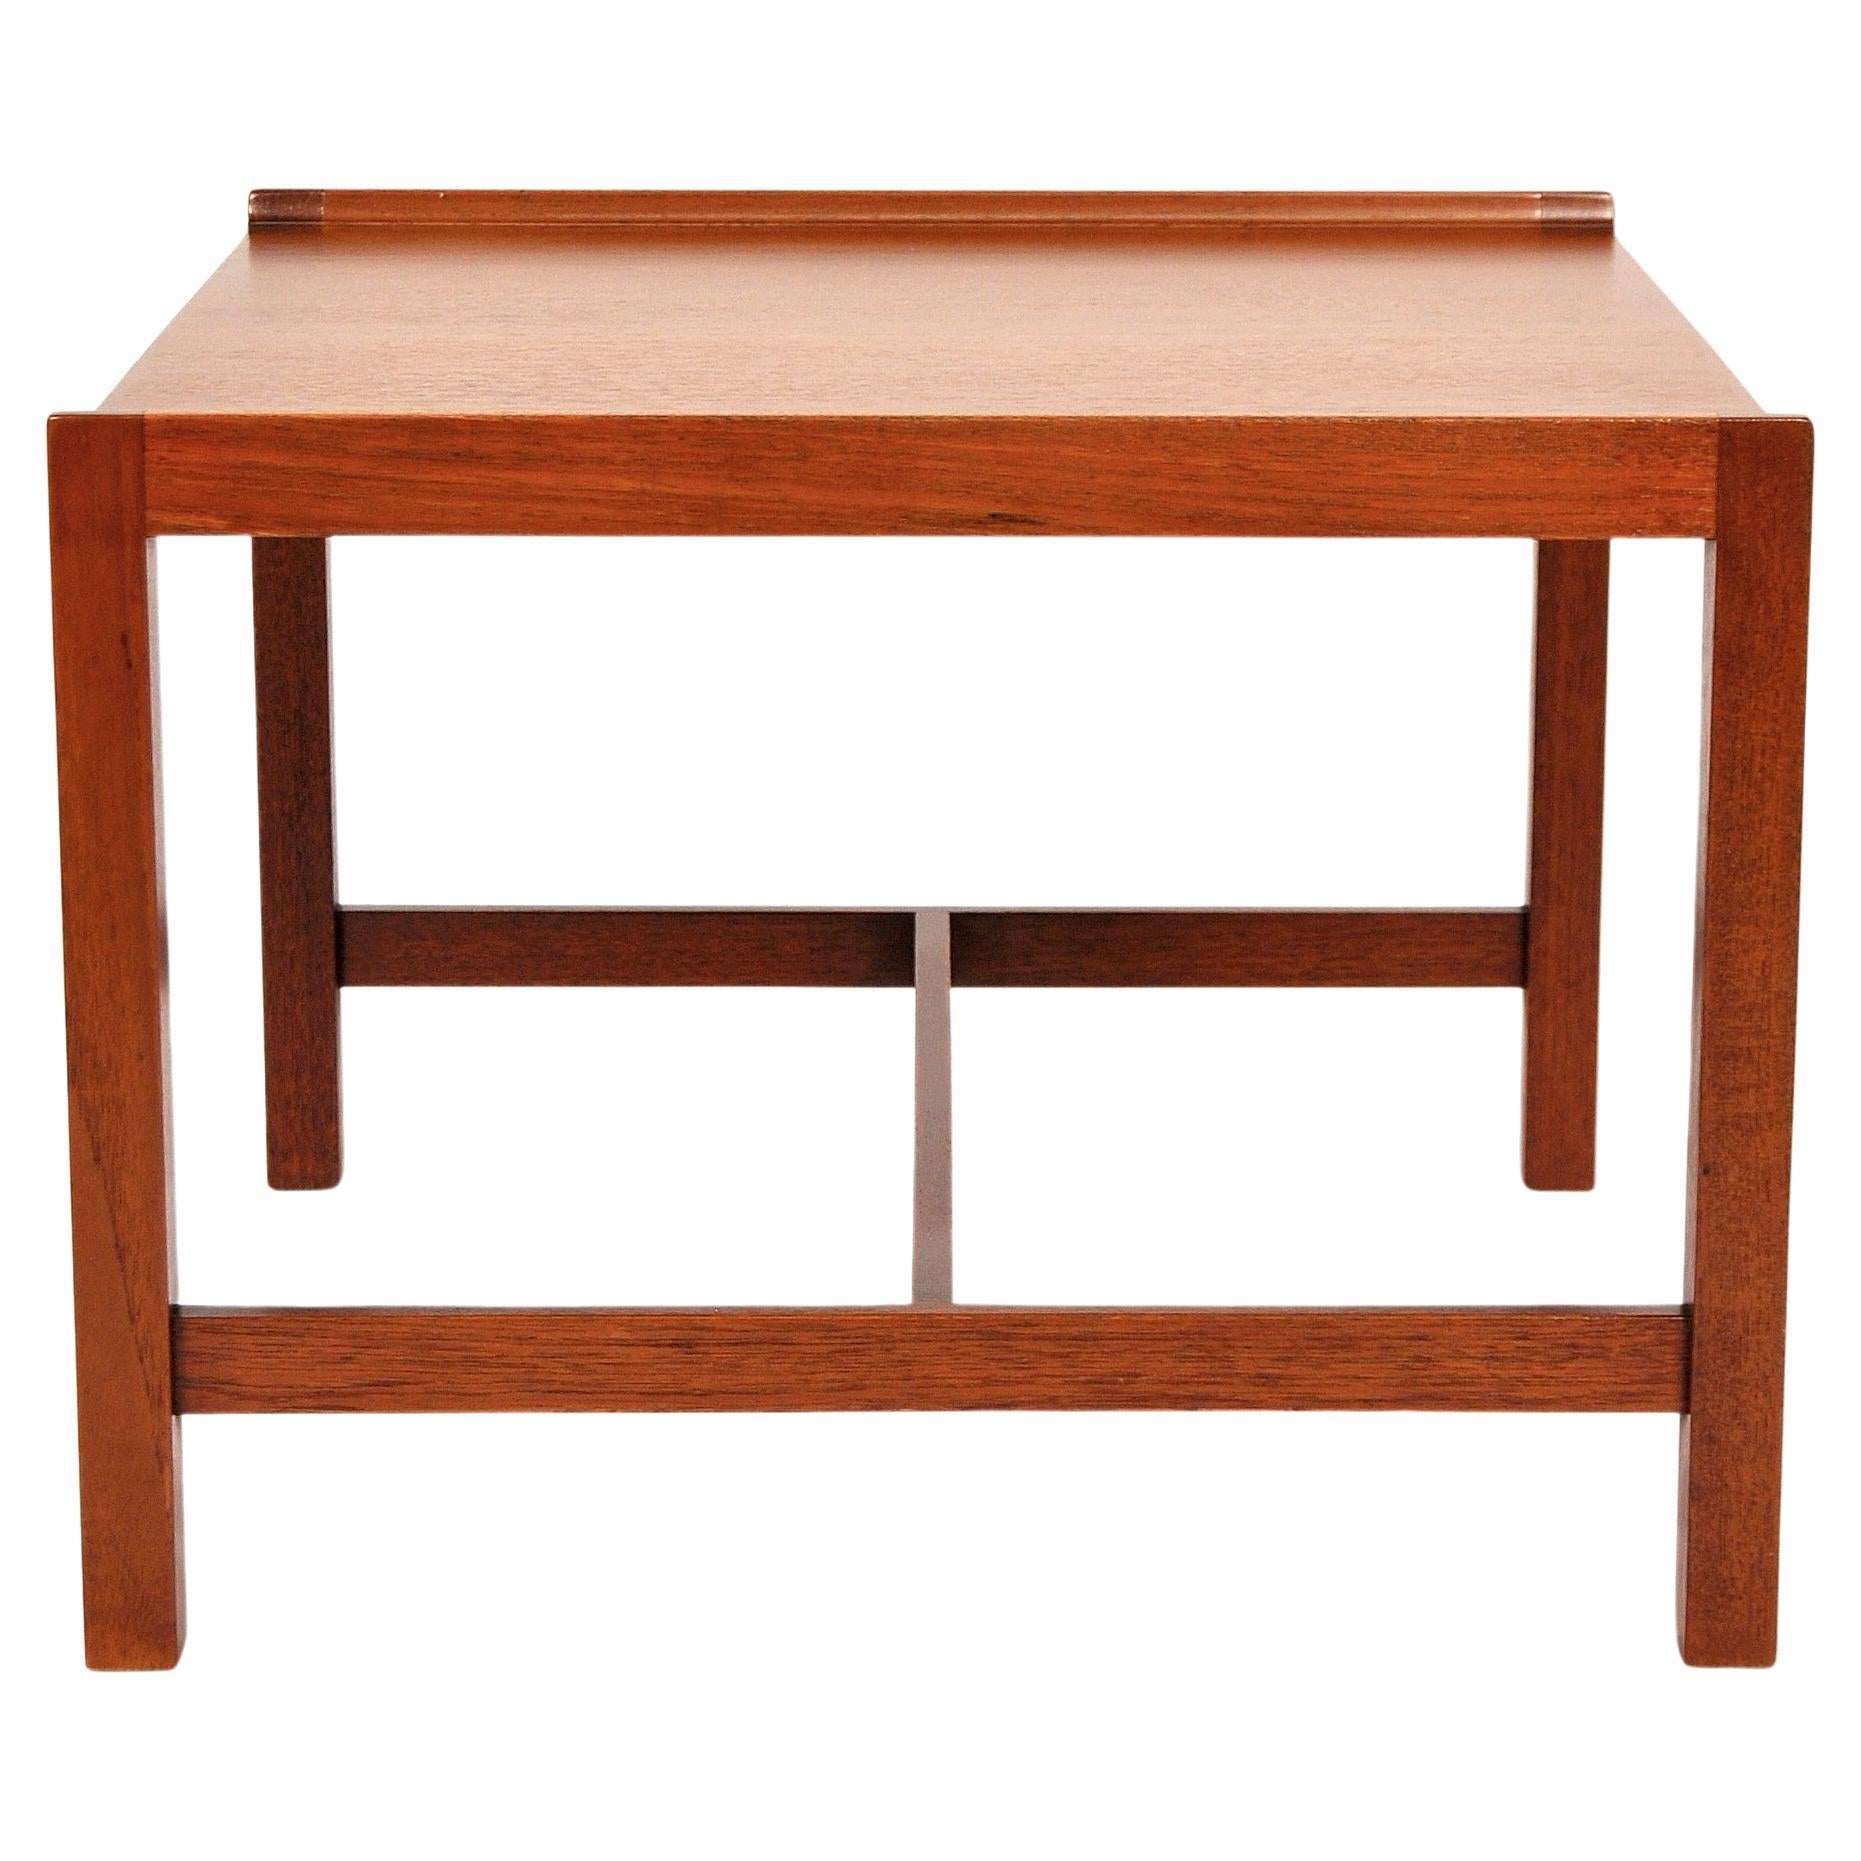 20th Century Scandinavian Teak Side Table or Bench by Brode Blindheim For Sale